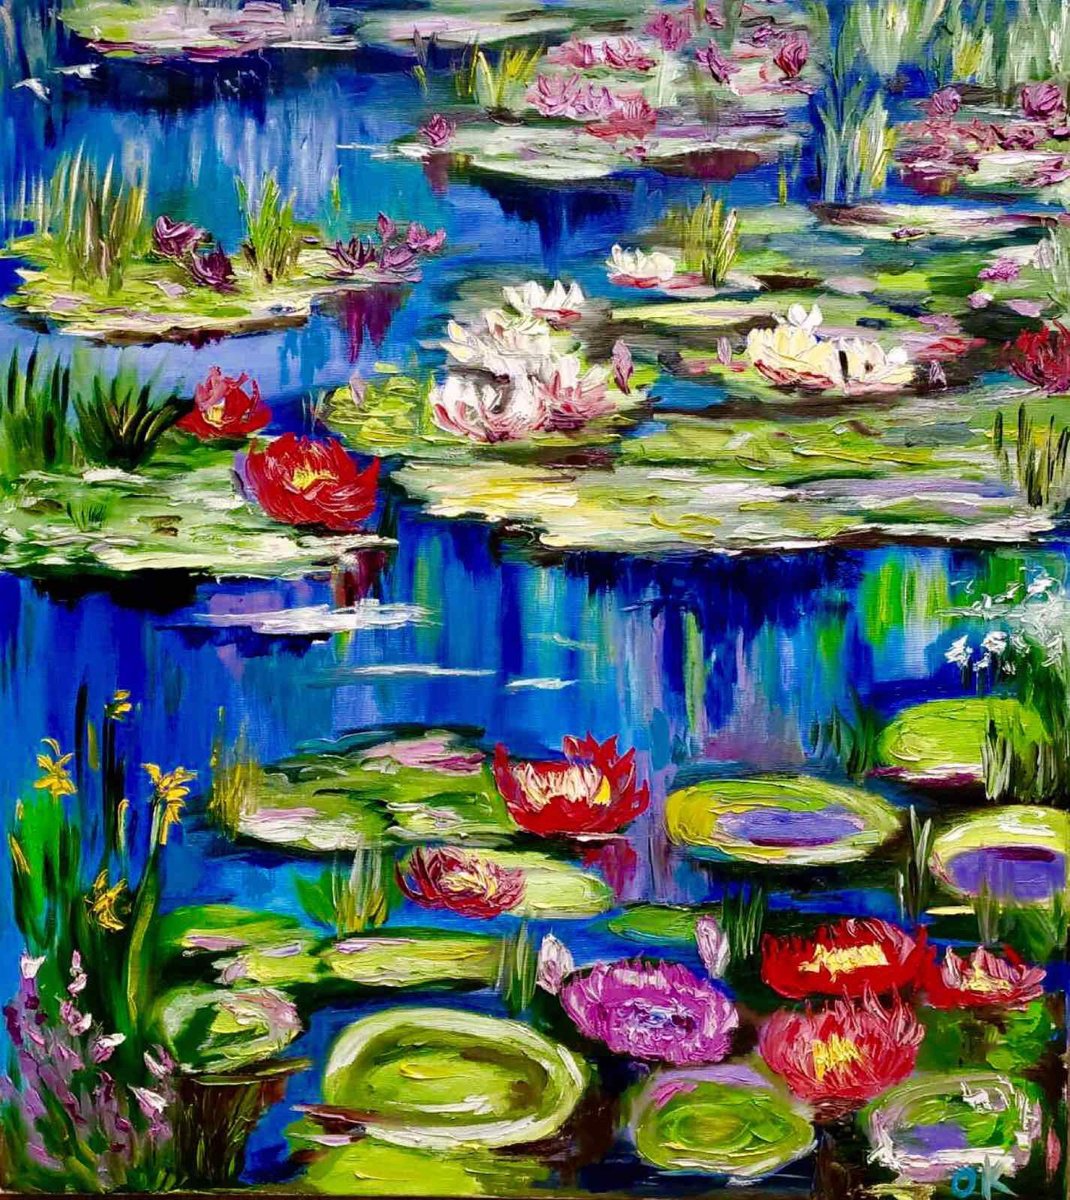 Pond of Claude Monet in Giverny , water lilies, irises by Olga Koval